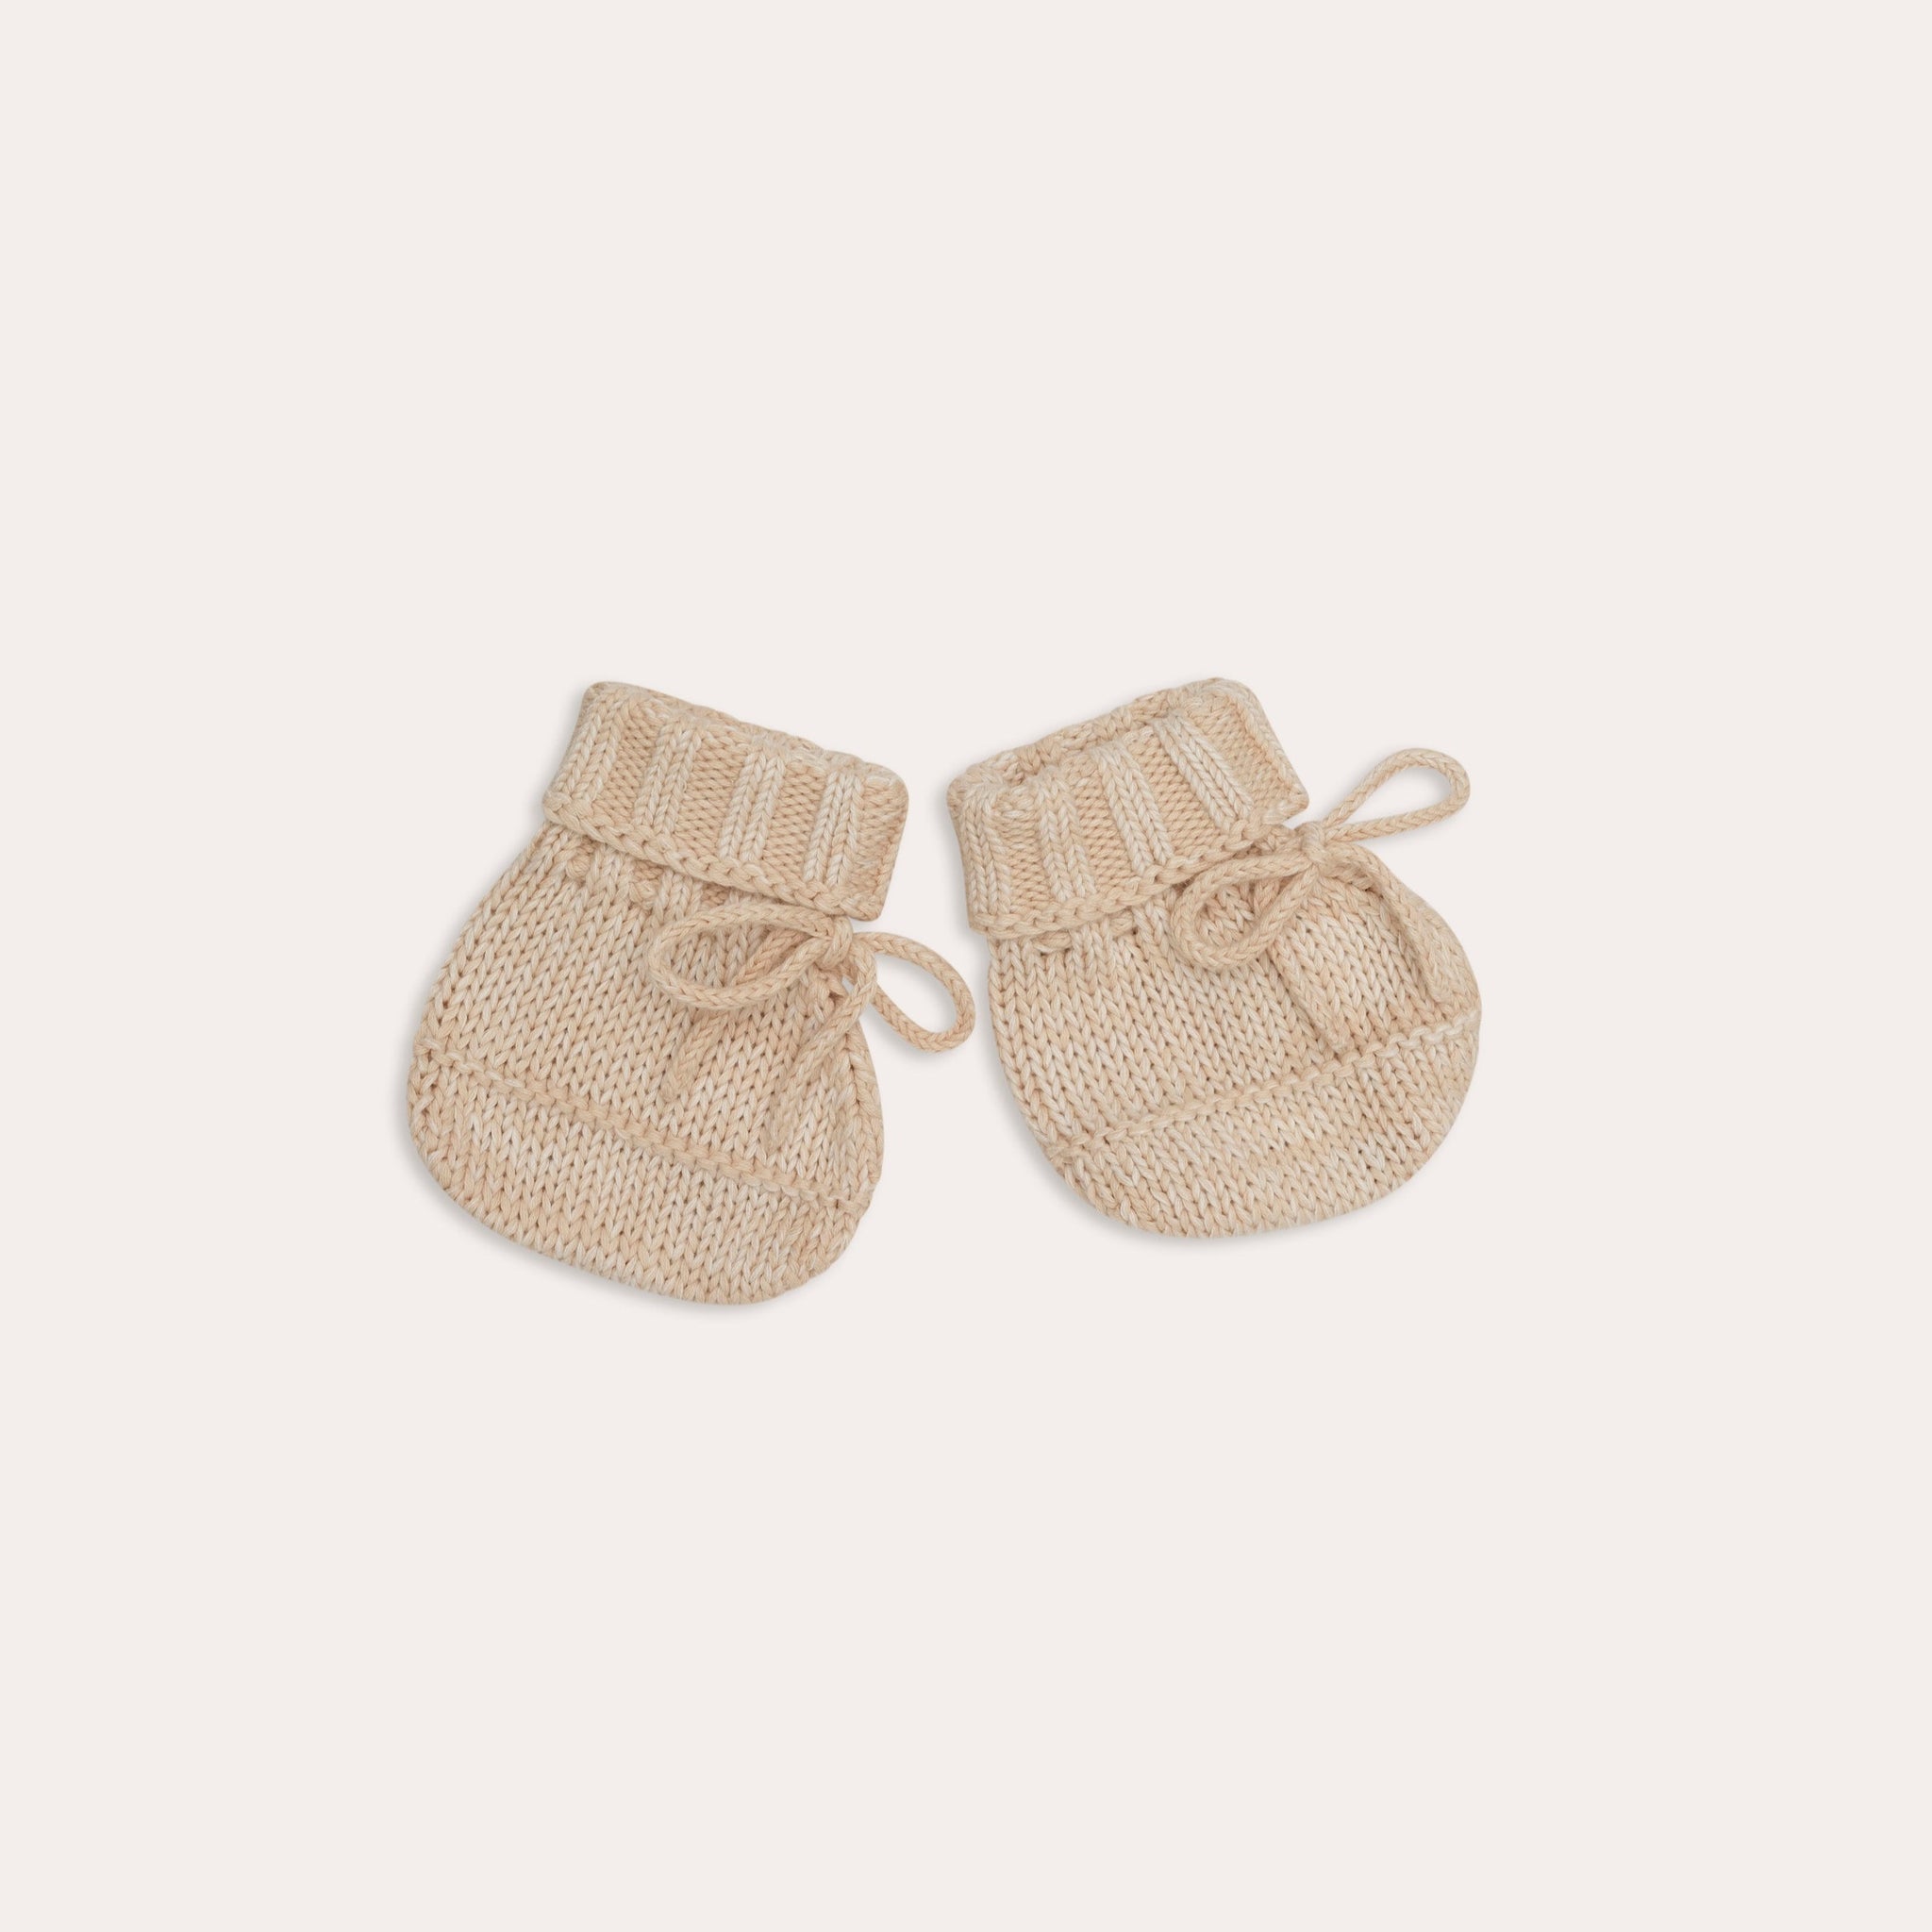 A pair of Illoura the Label knitted alba booties in sand on a white background.